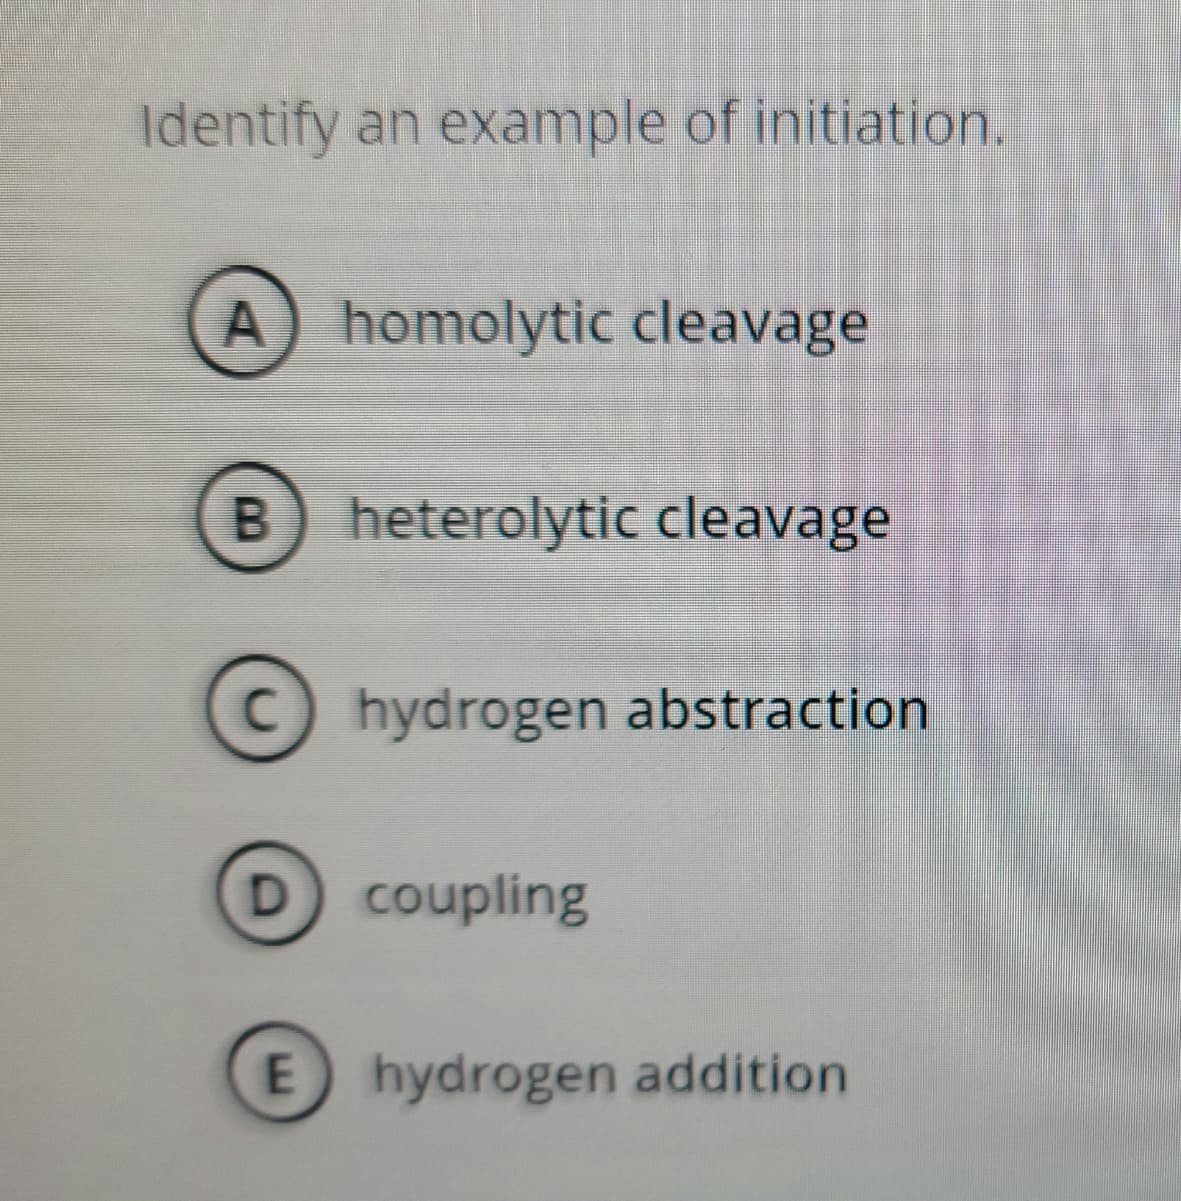 Identify an example of initiation.
A) homolytic cleavage
B) heterolytic cleavage
C hydrogen abstraction
D coupling
E hydrogen addition
